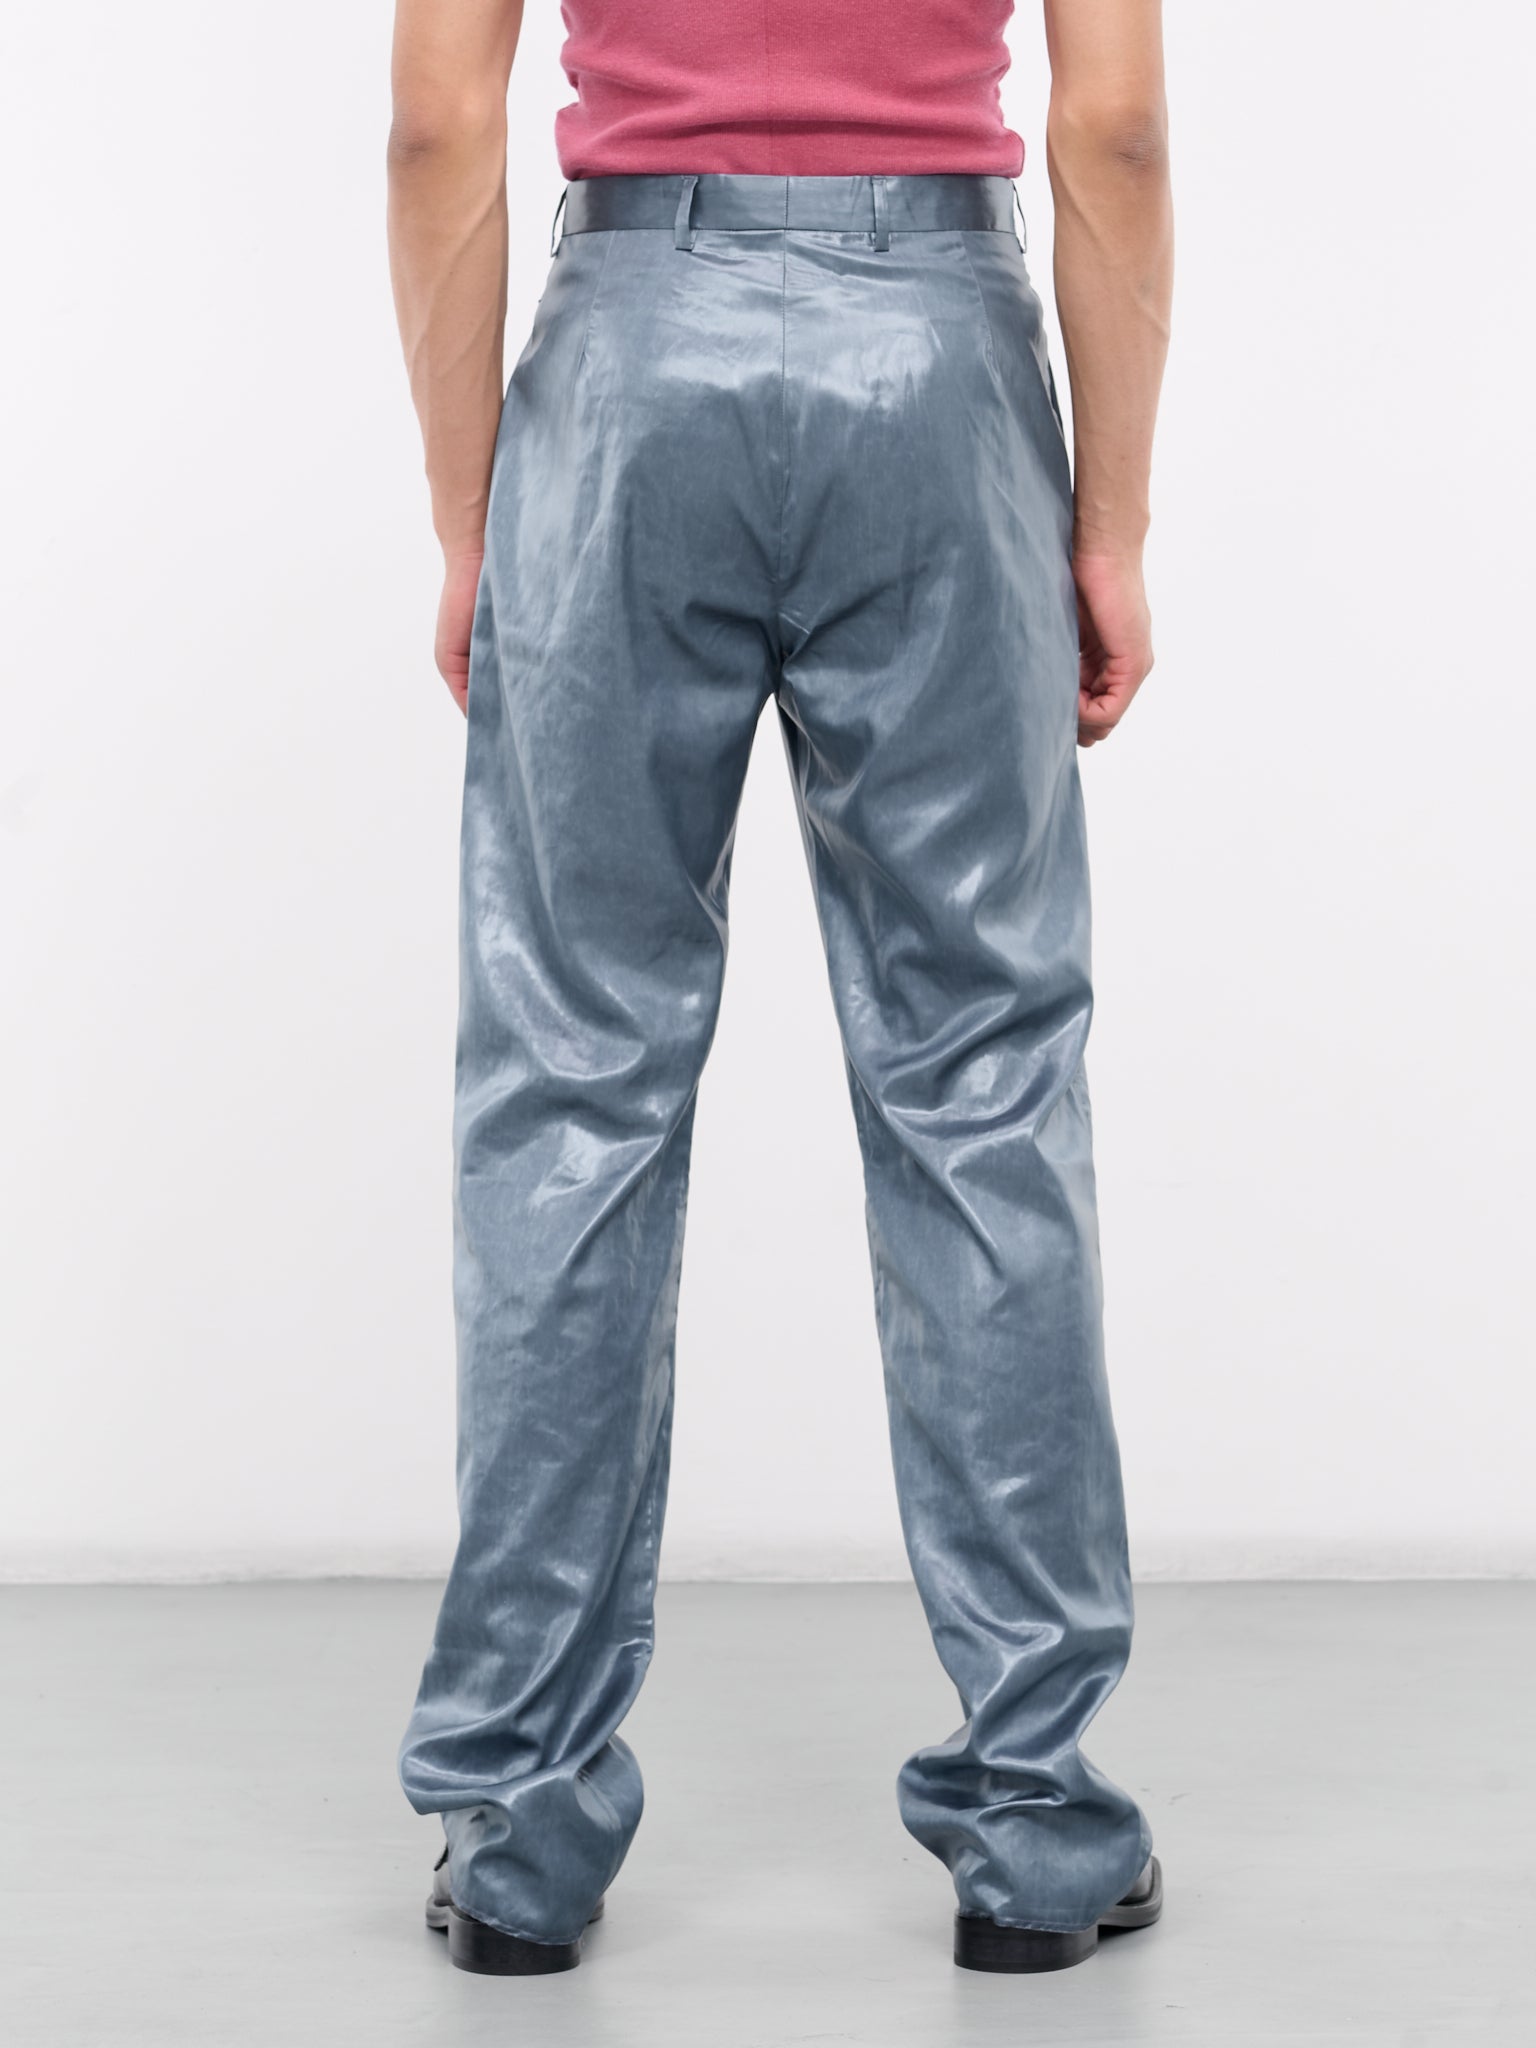 Narrow Front Trousers (326-WET-LOOK-PETROL)